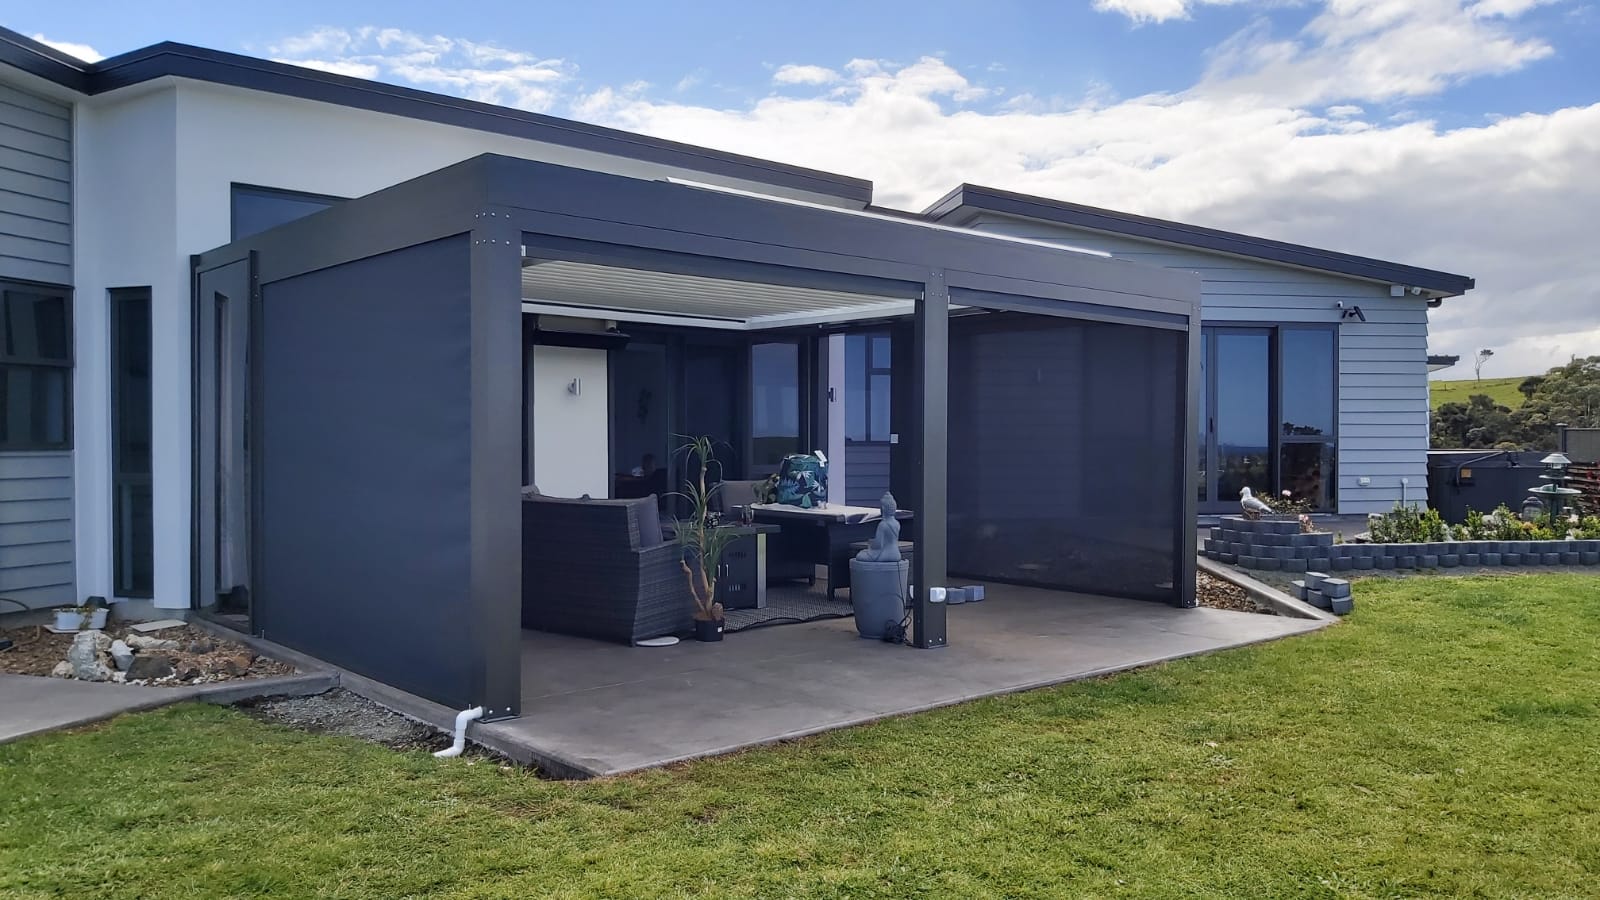 Patio side covers in Auckland home create outdoor shade